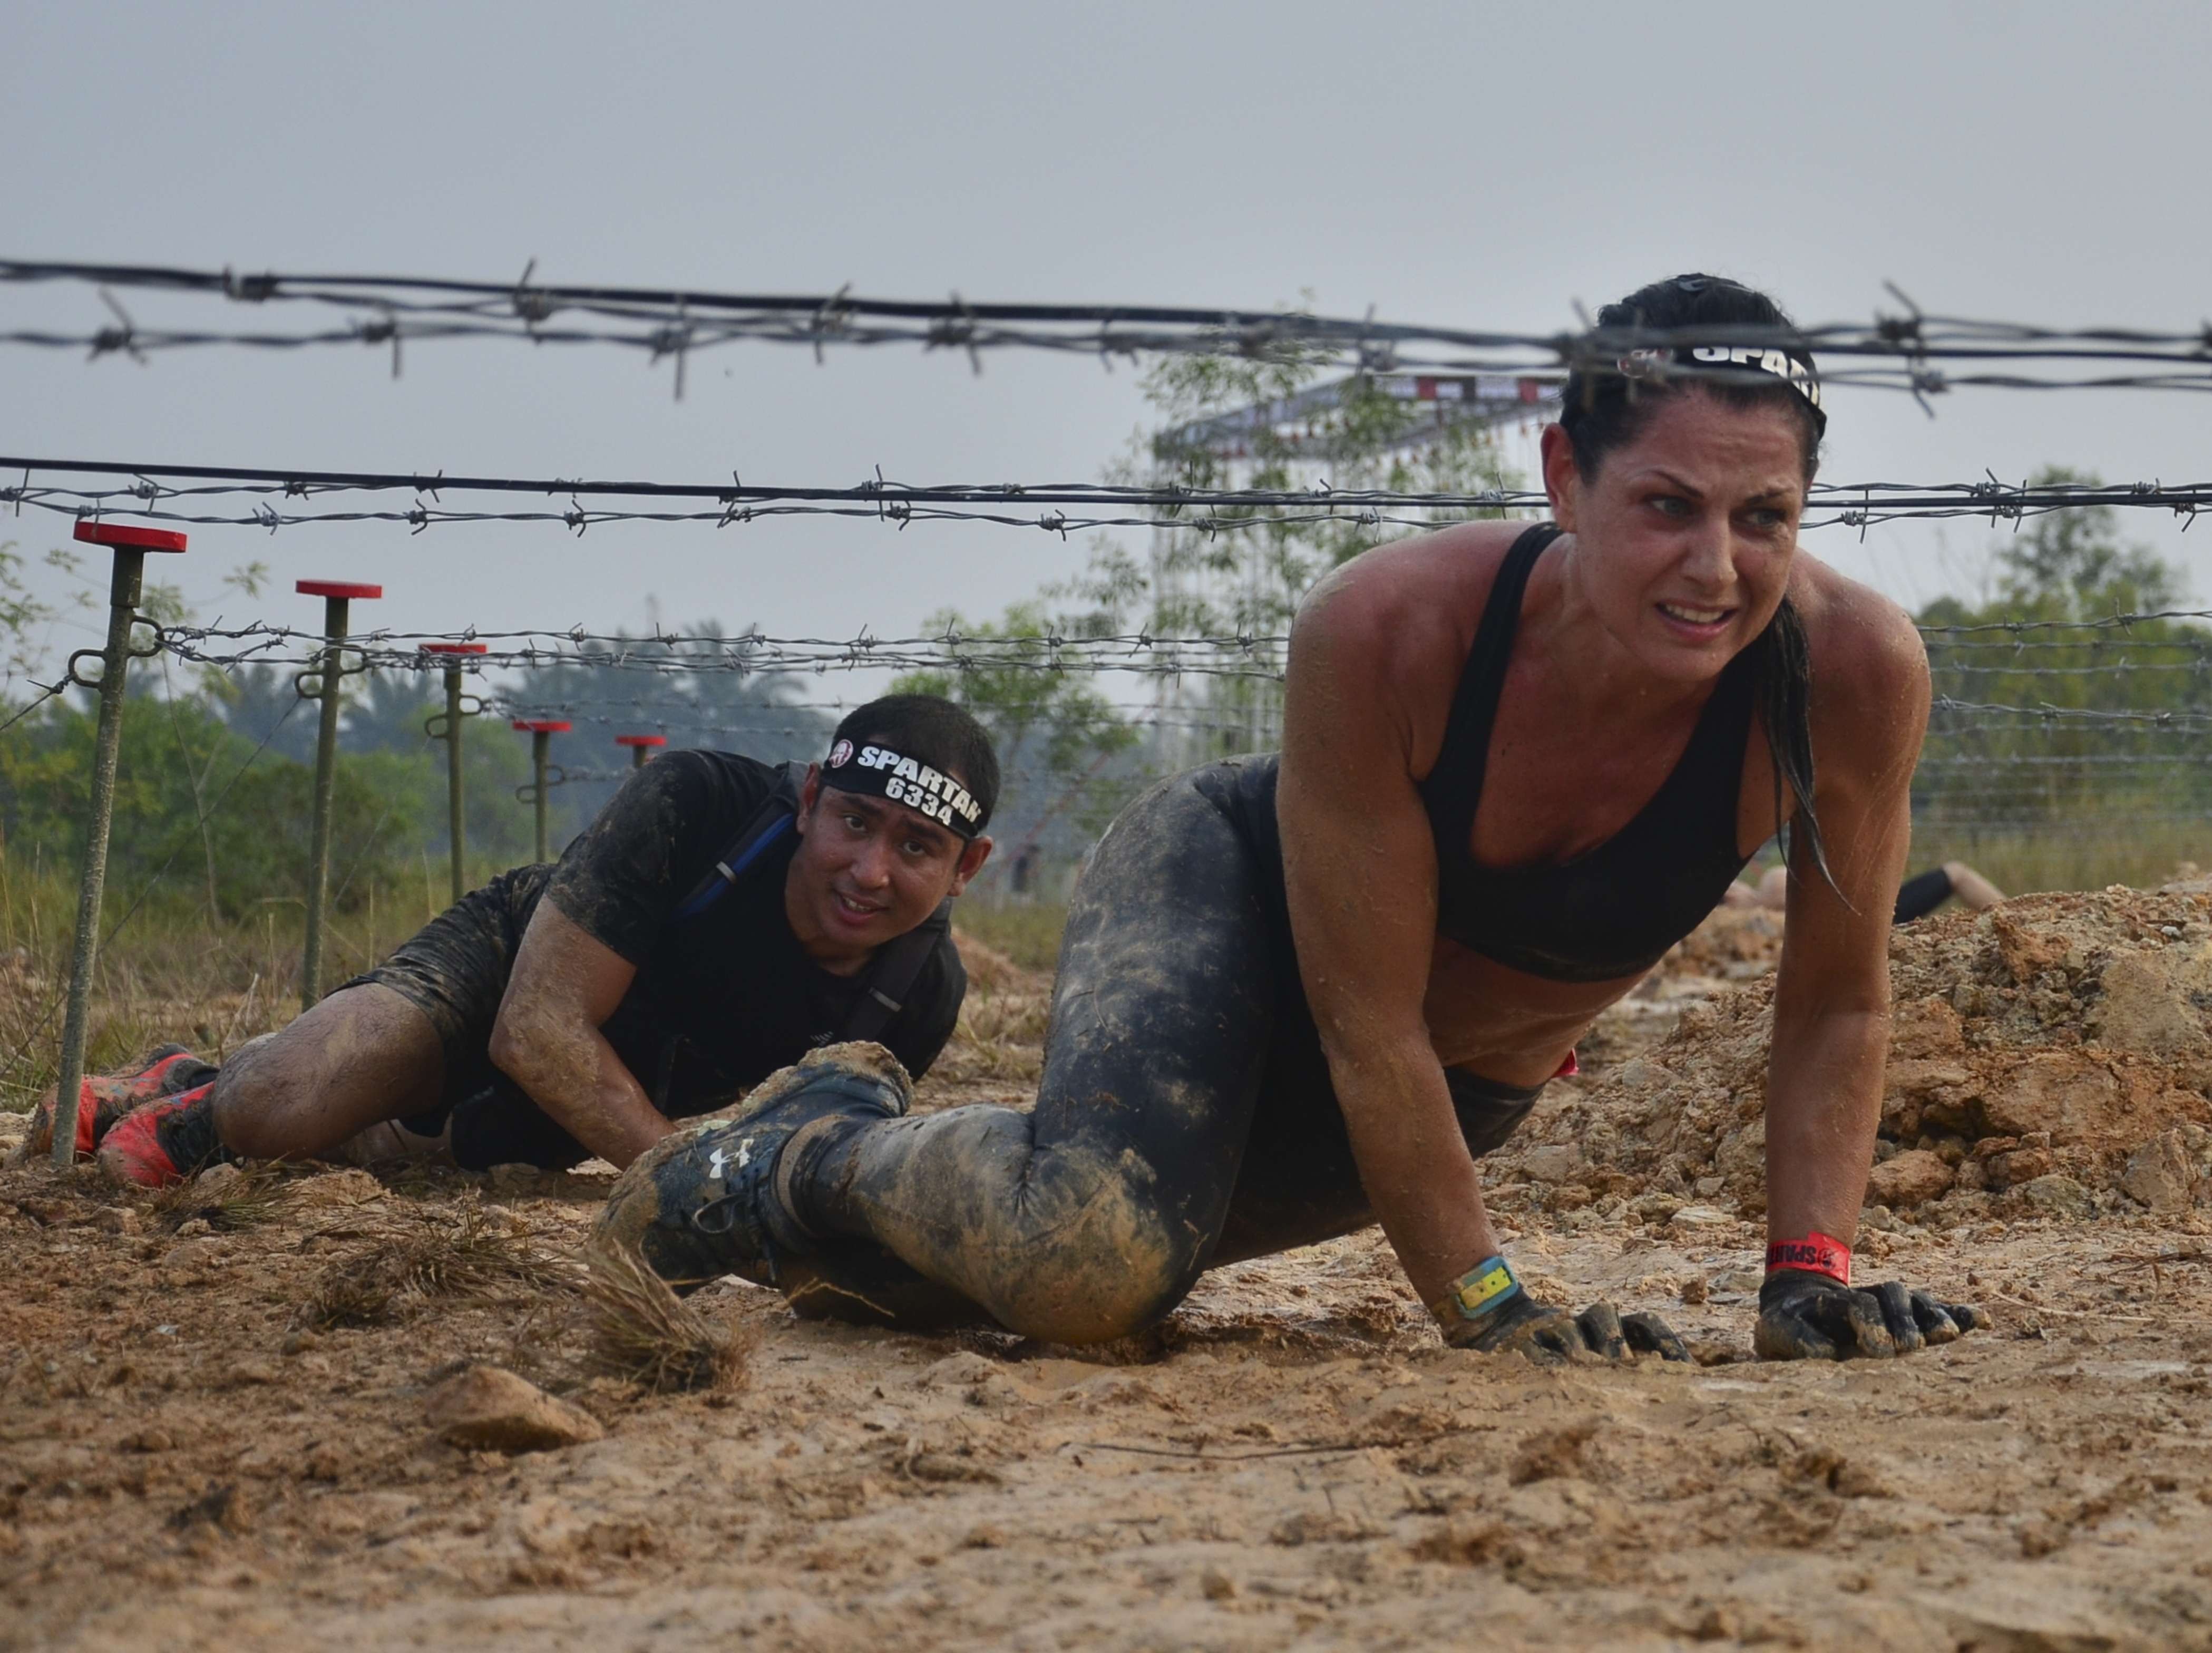 Nataile Dau, 44, crawling under barbed wire at Spartan Race Malaysia. She eventually finished third.